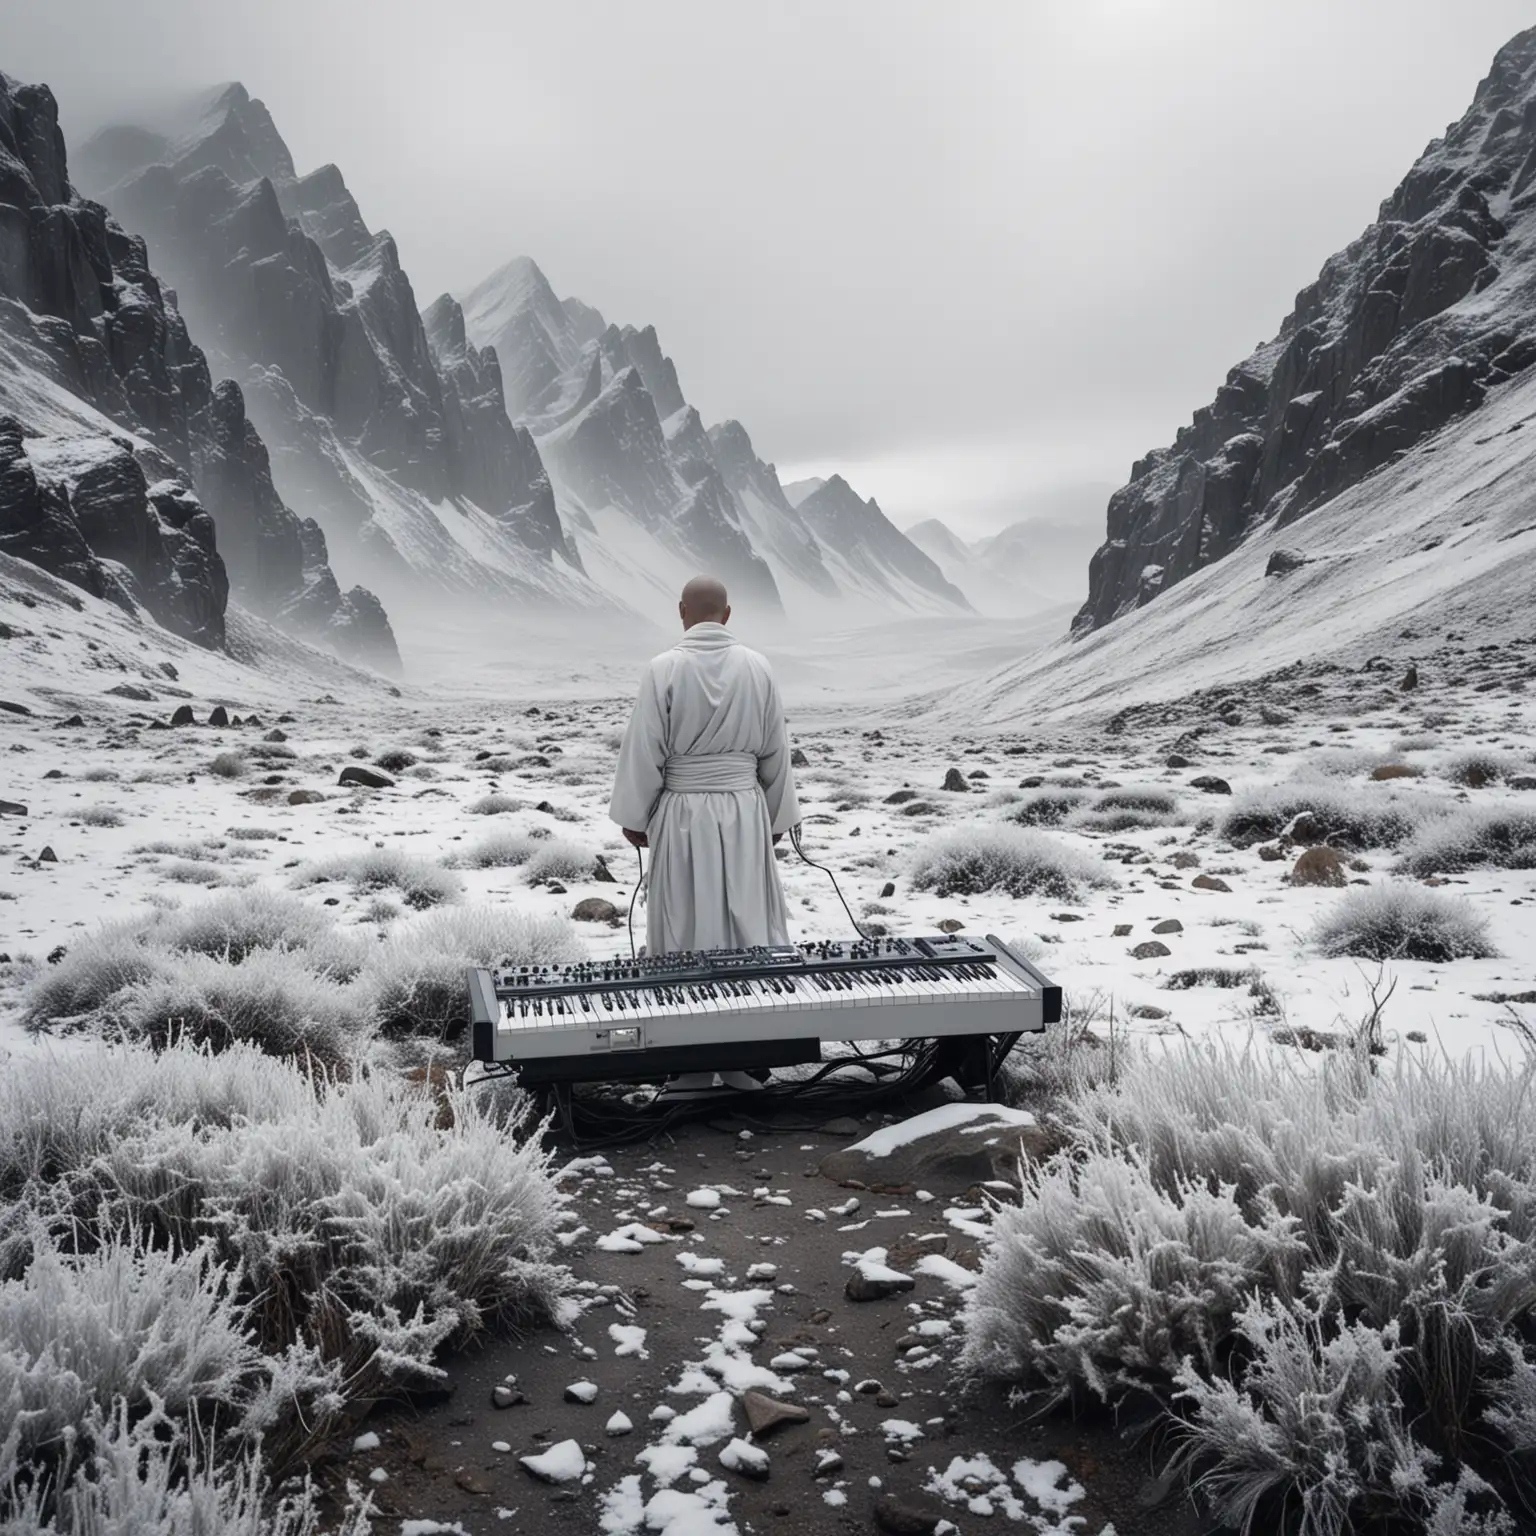 Zen Monk in White Robes Pushing Synthesizer Up Desolate Mountain